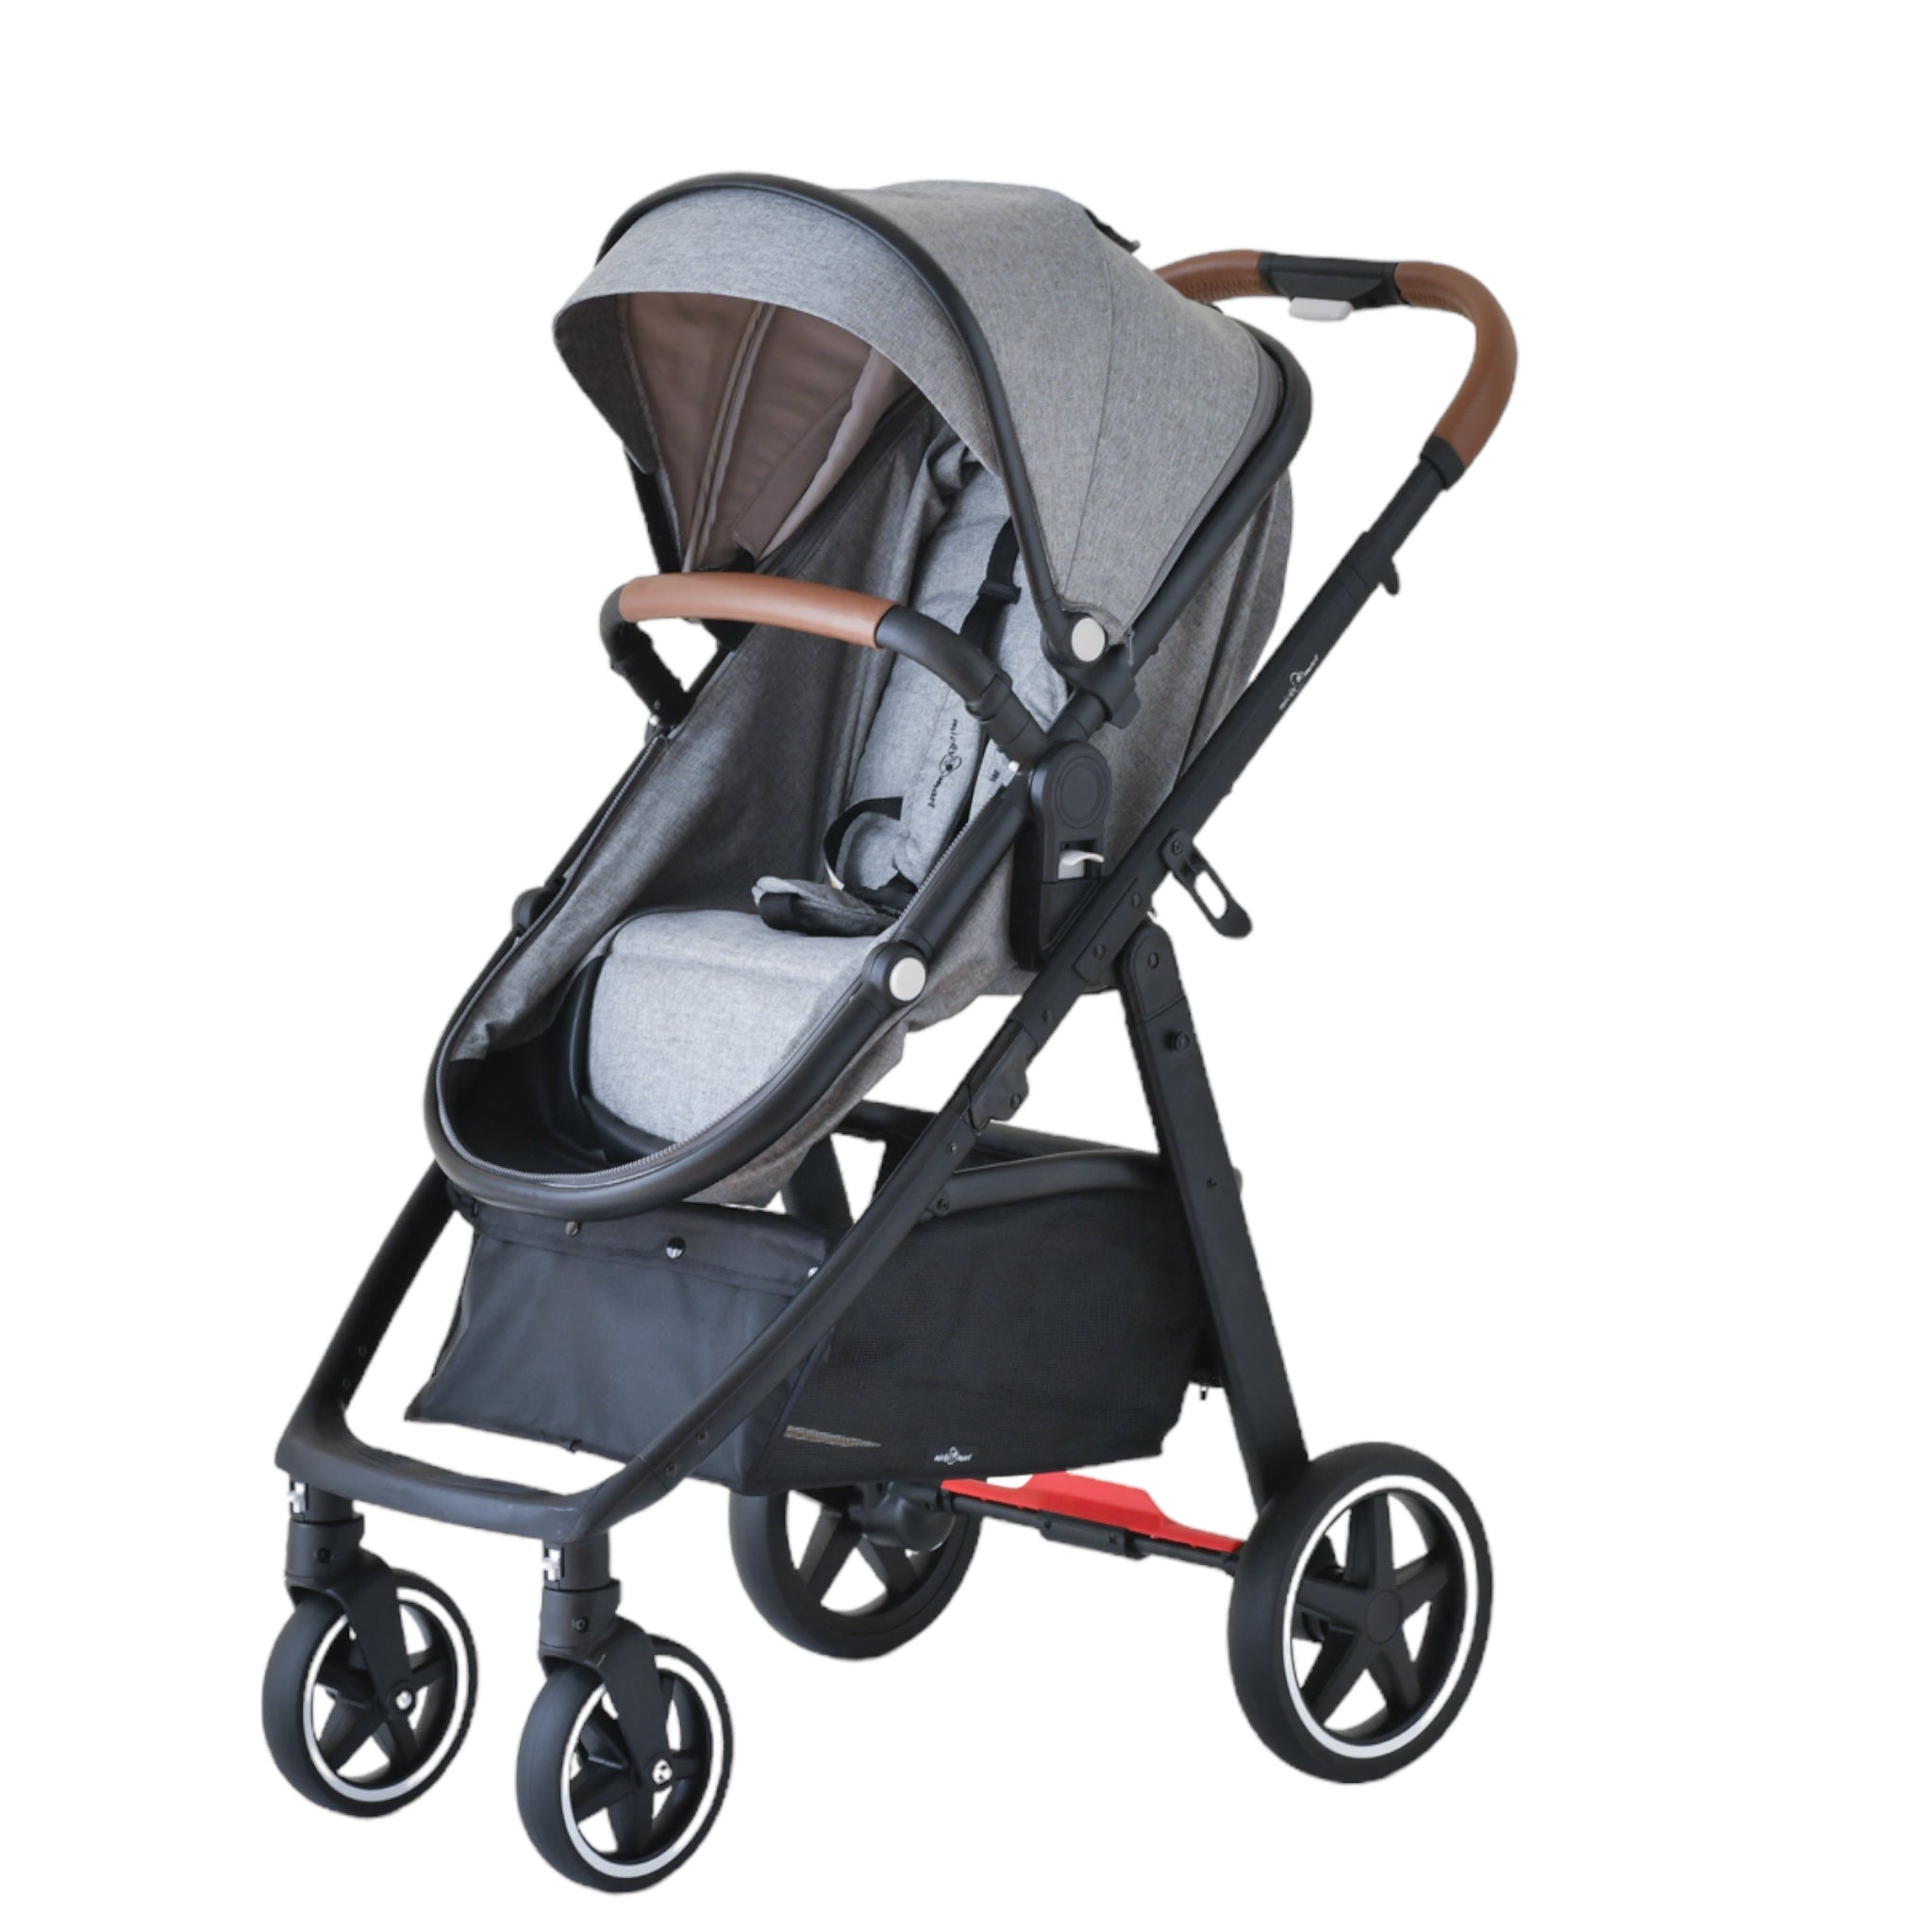 Micky Mart Baby Pram / Stroller 2 in 1 Convertible Leather Handle - Grey